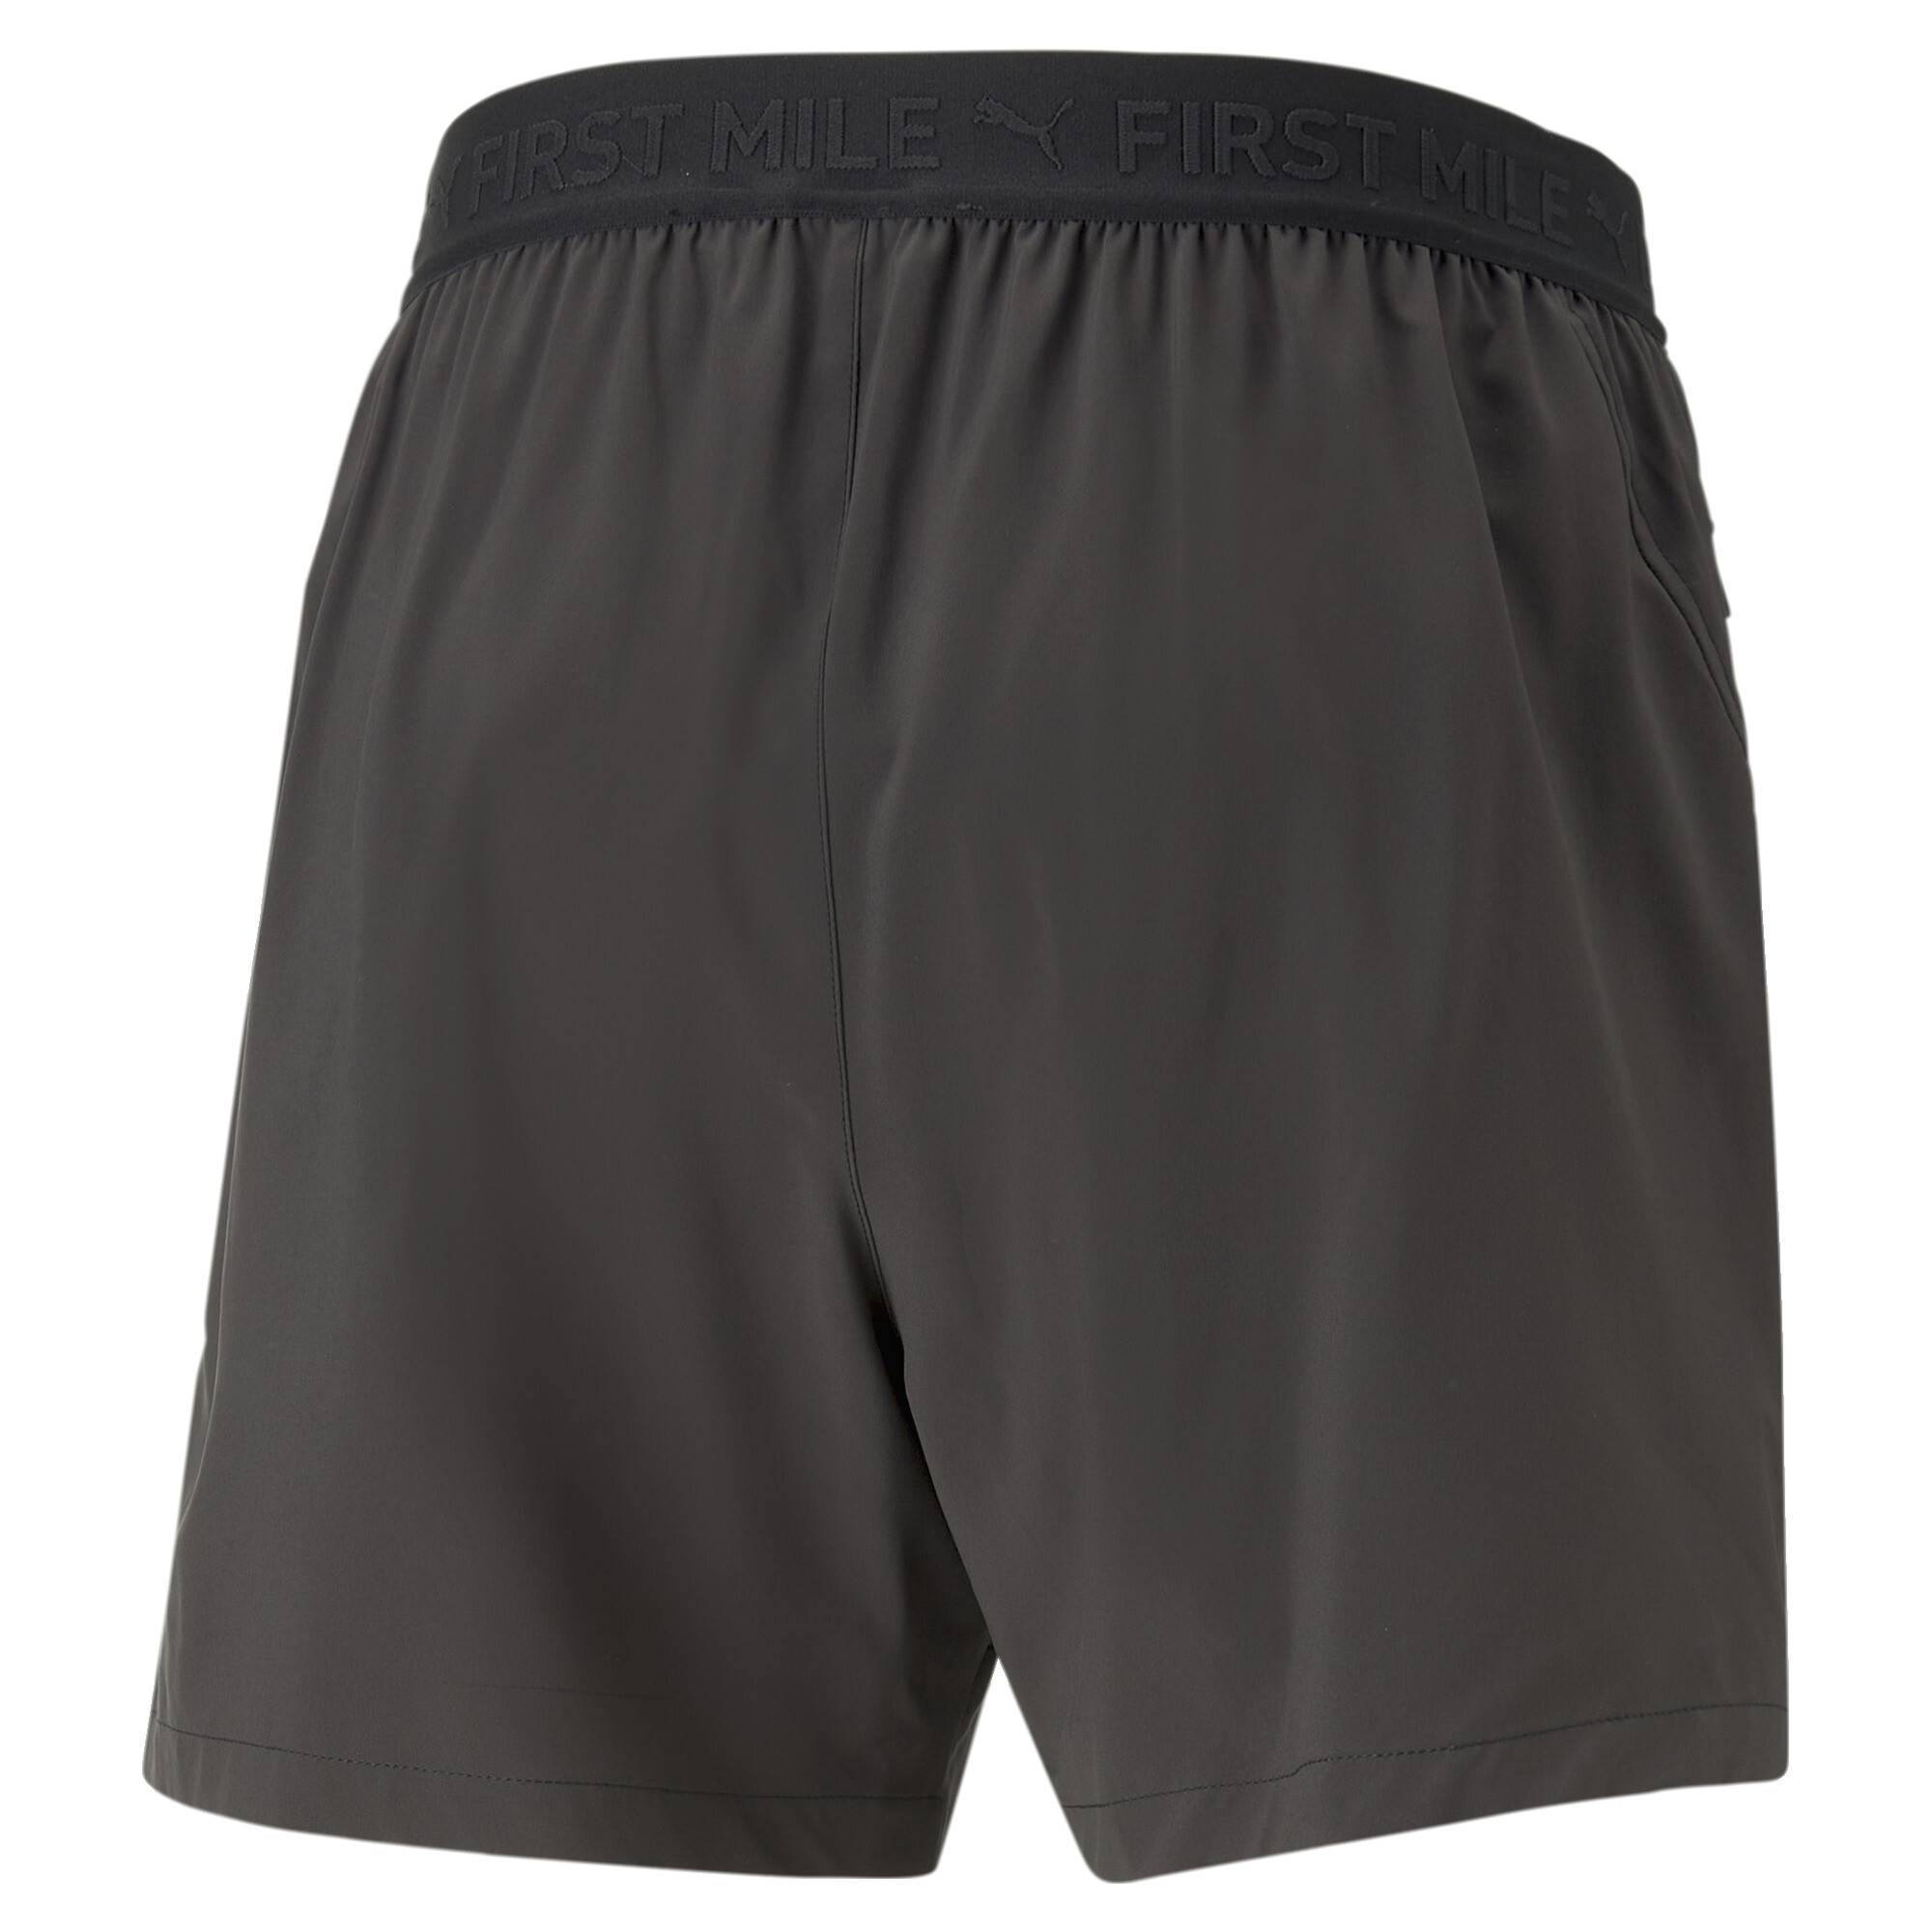 Men's PUMA X First Mile Woven 5 Running Shorts Men In Black, Size Large